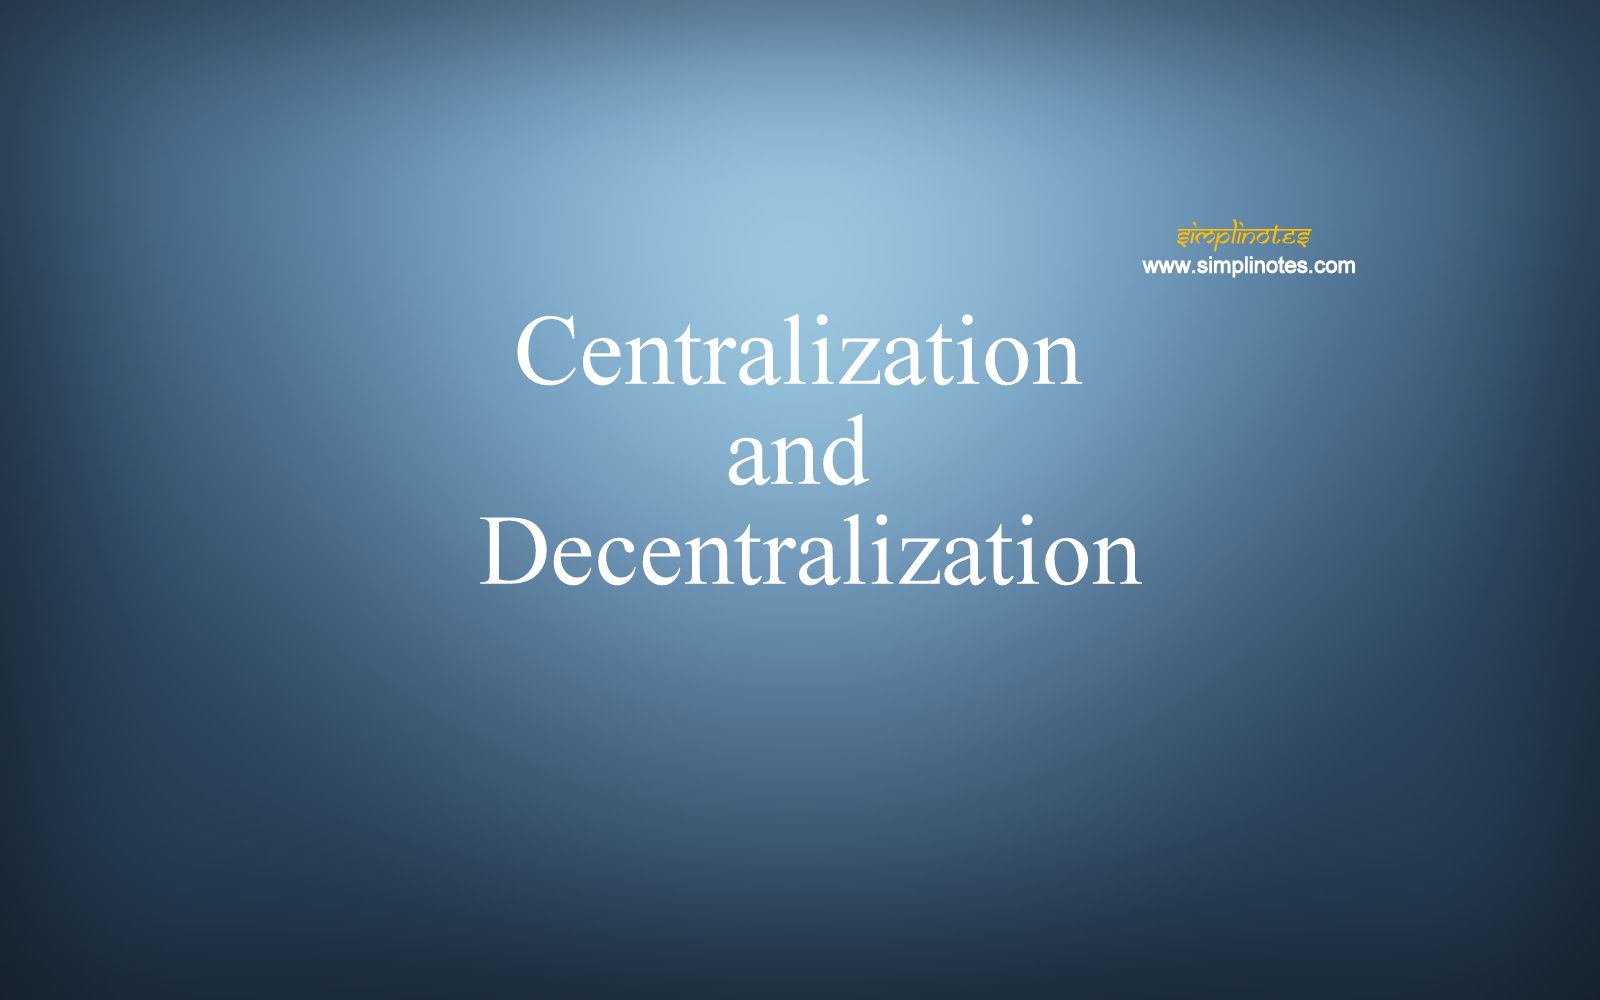 Centralization & Decentralization – Meaning, Definitions, Merits and Demerits